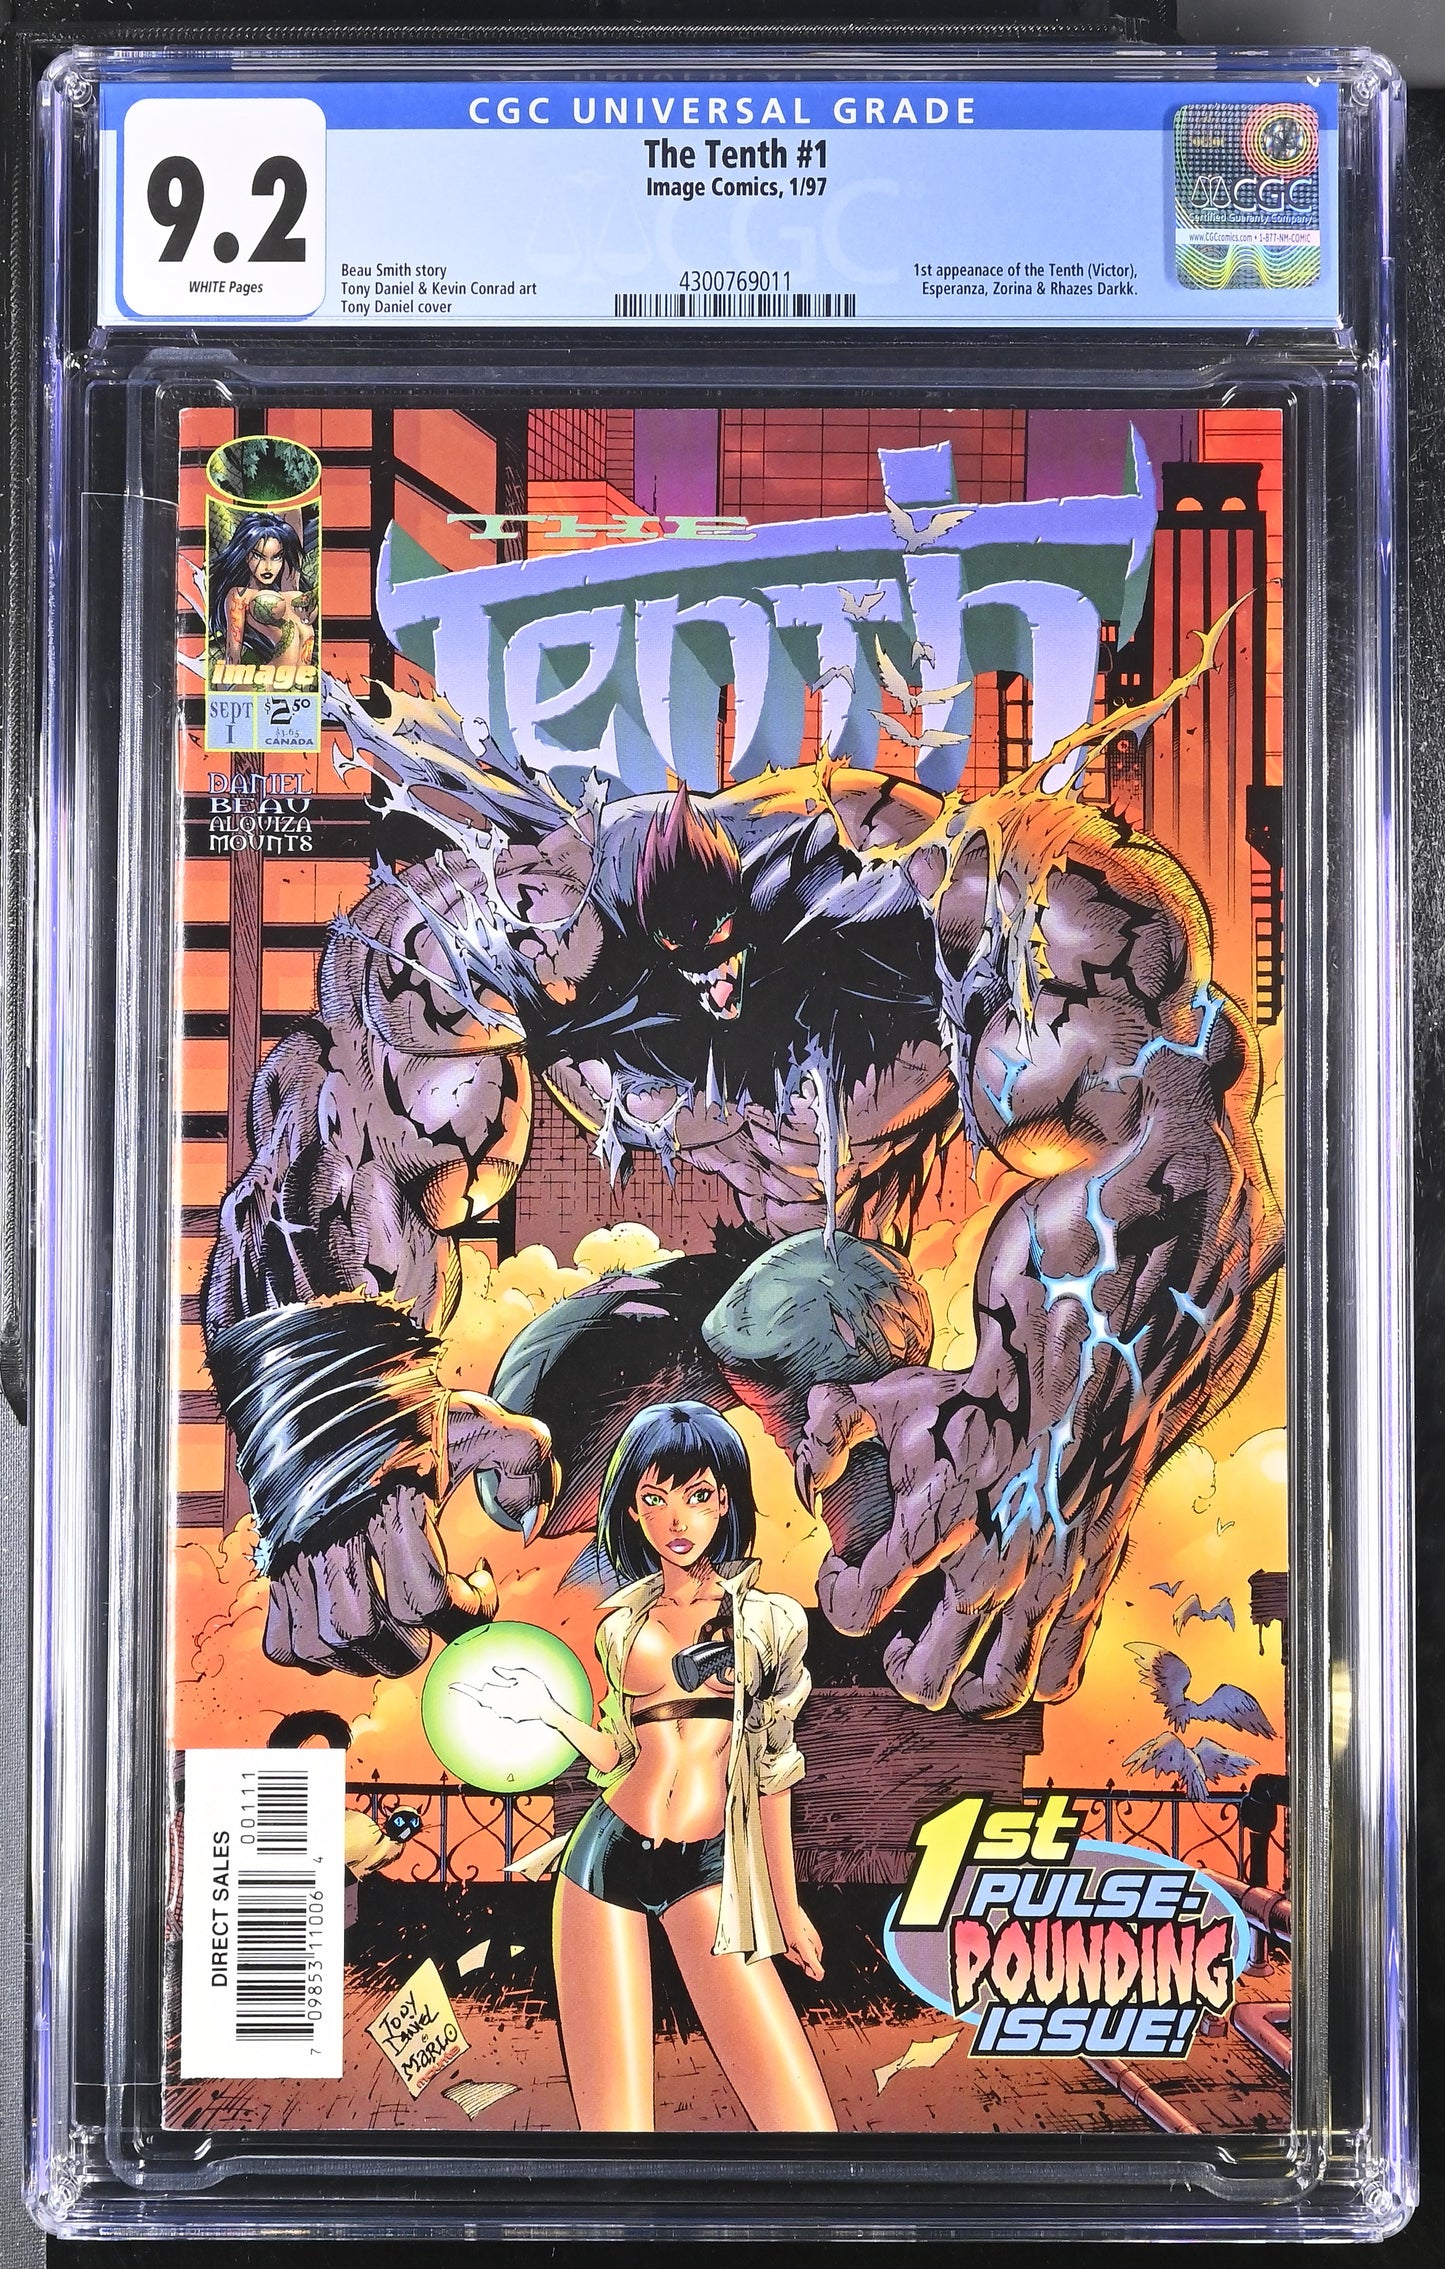 The Tenth #1 1/97 Image Comics CGC 9.2 White Pages POP 14